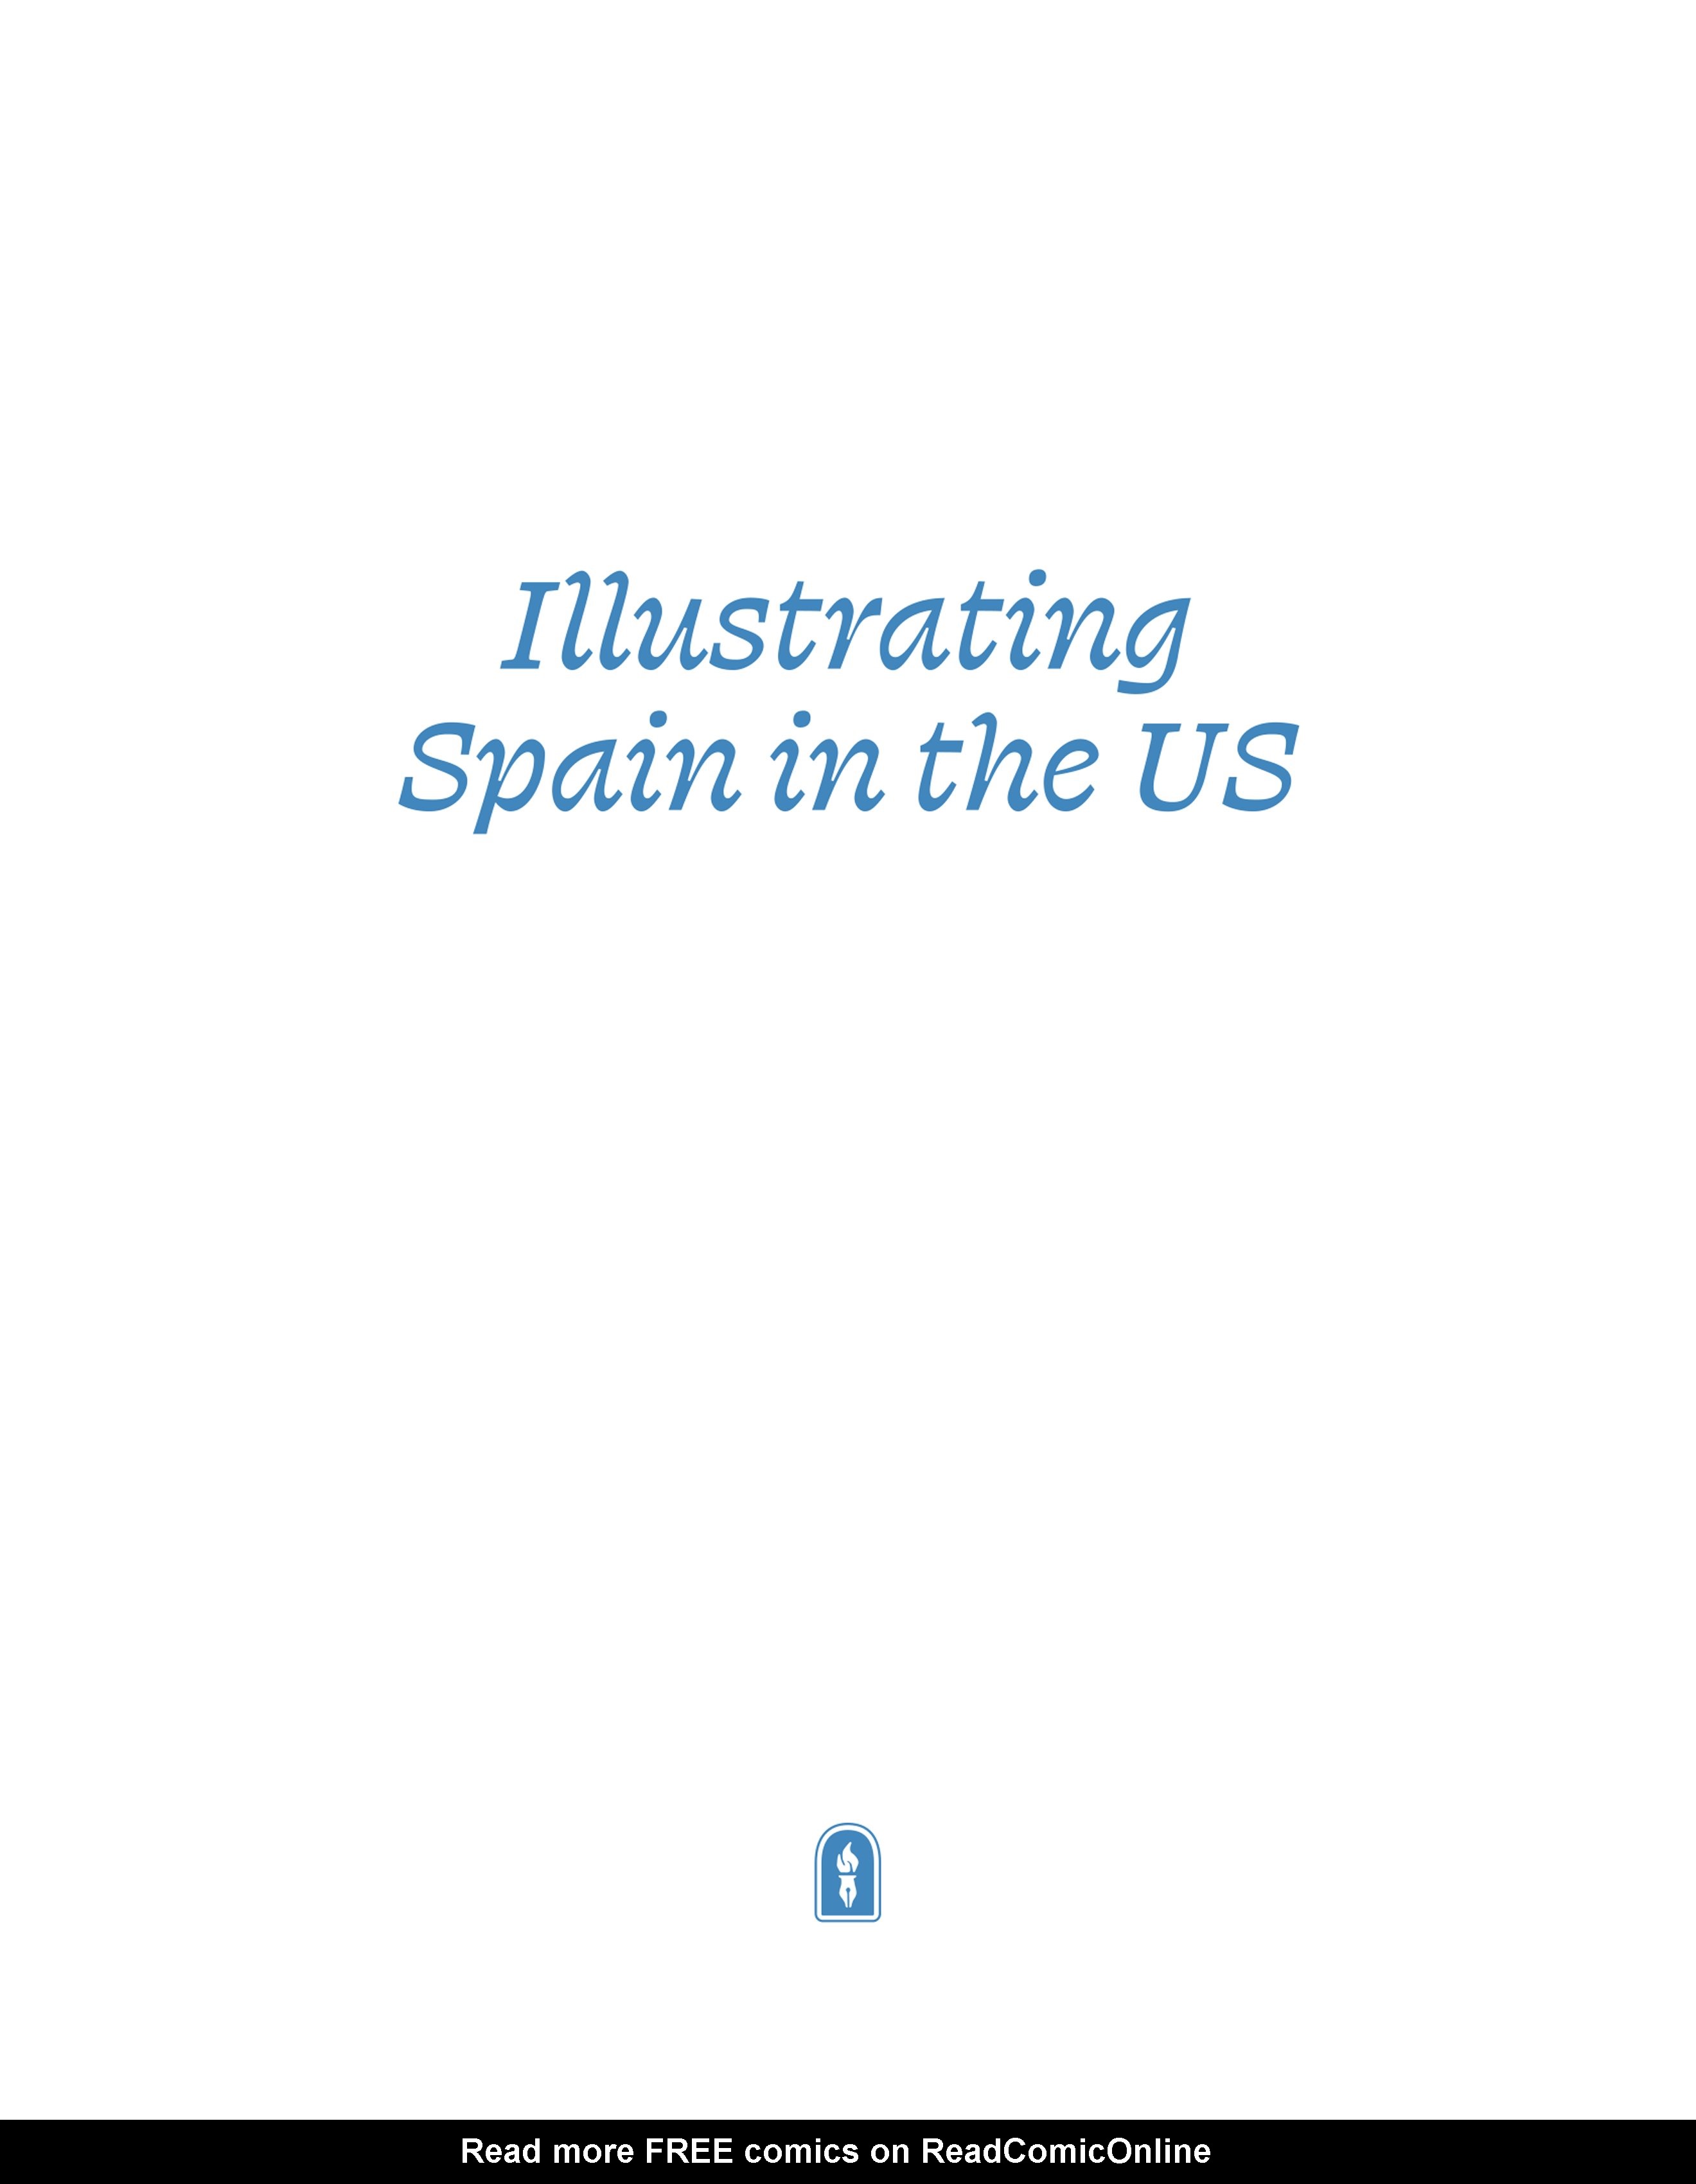 Read online Illustrating Spain in the US comic -  Issue # TPB - 4